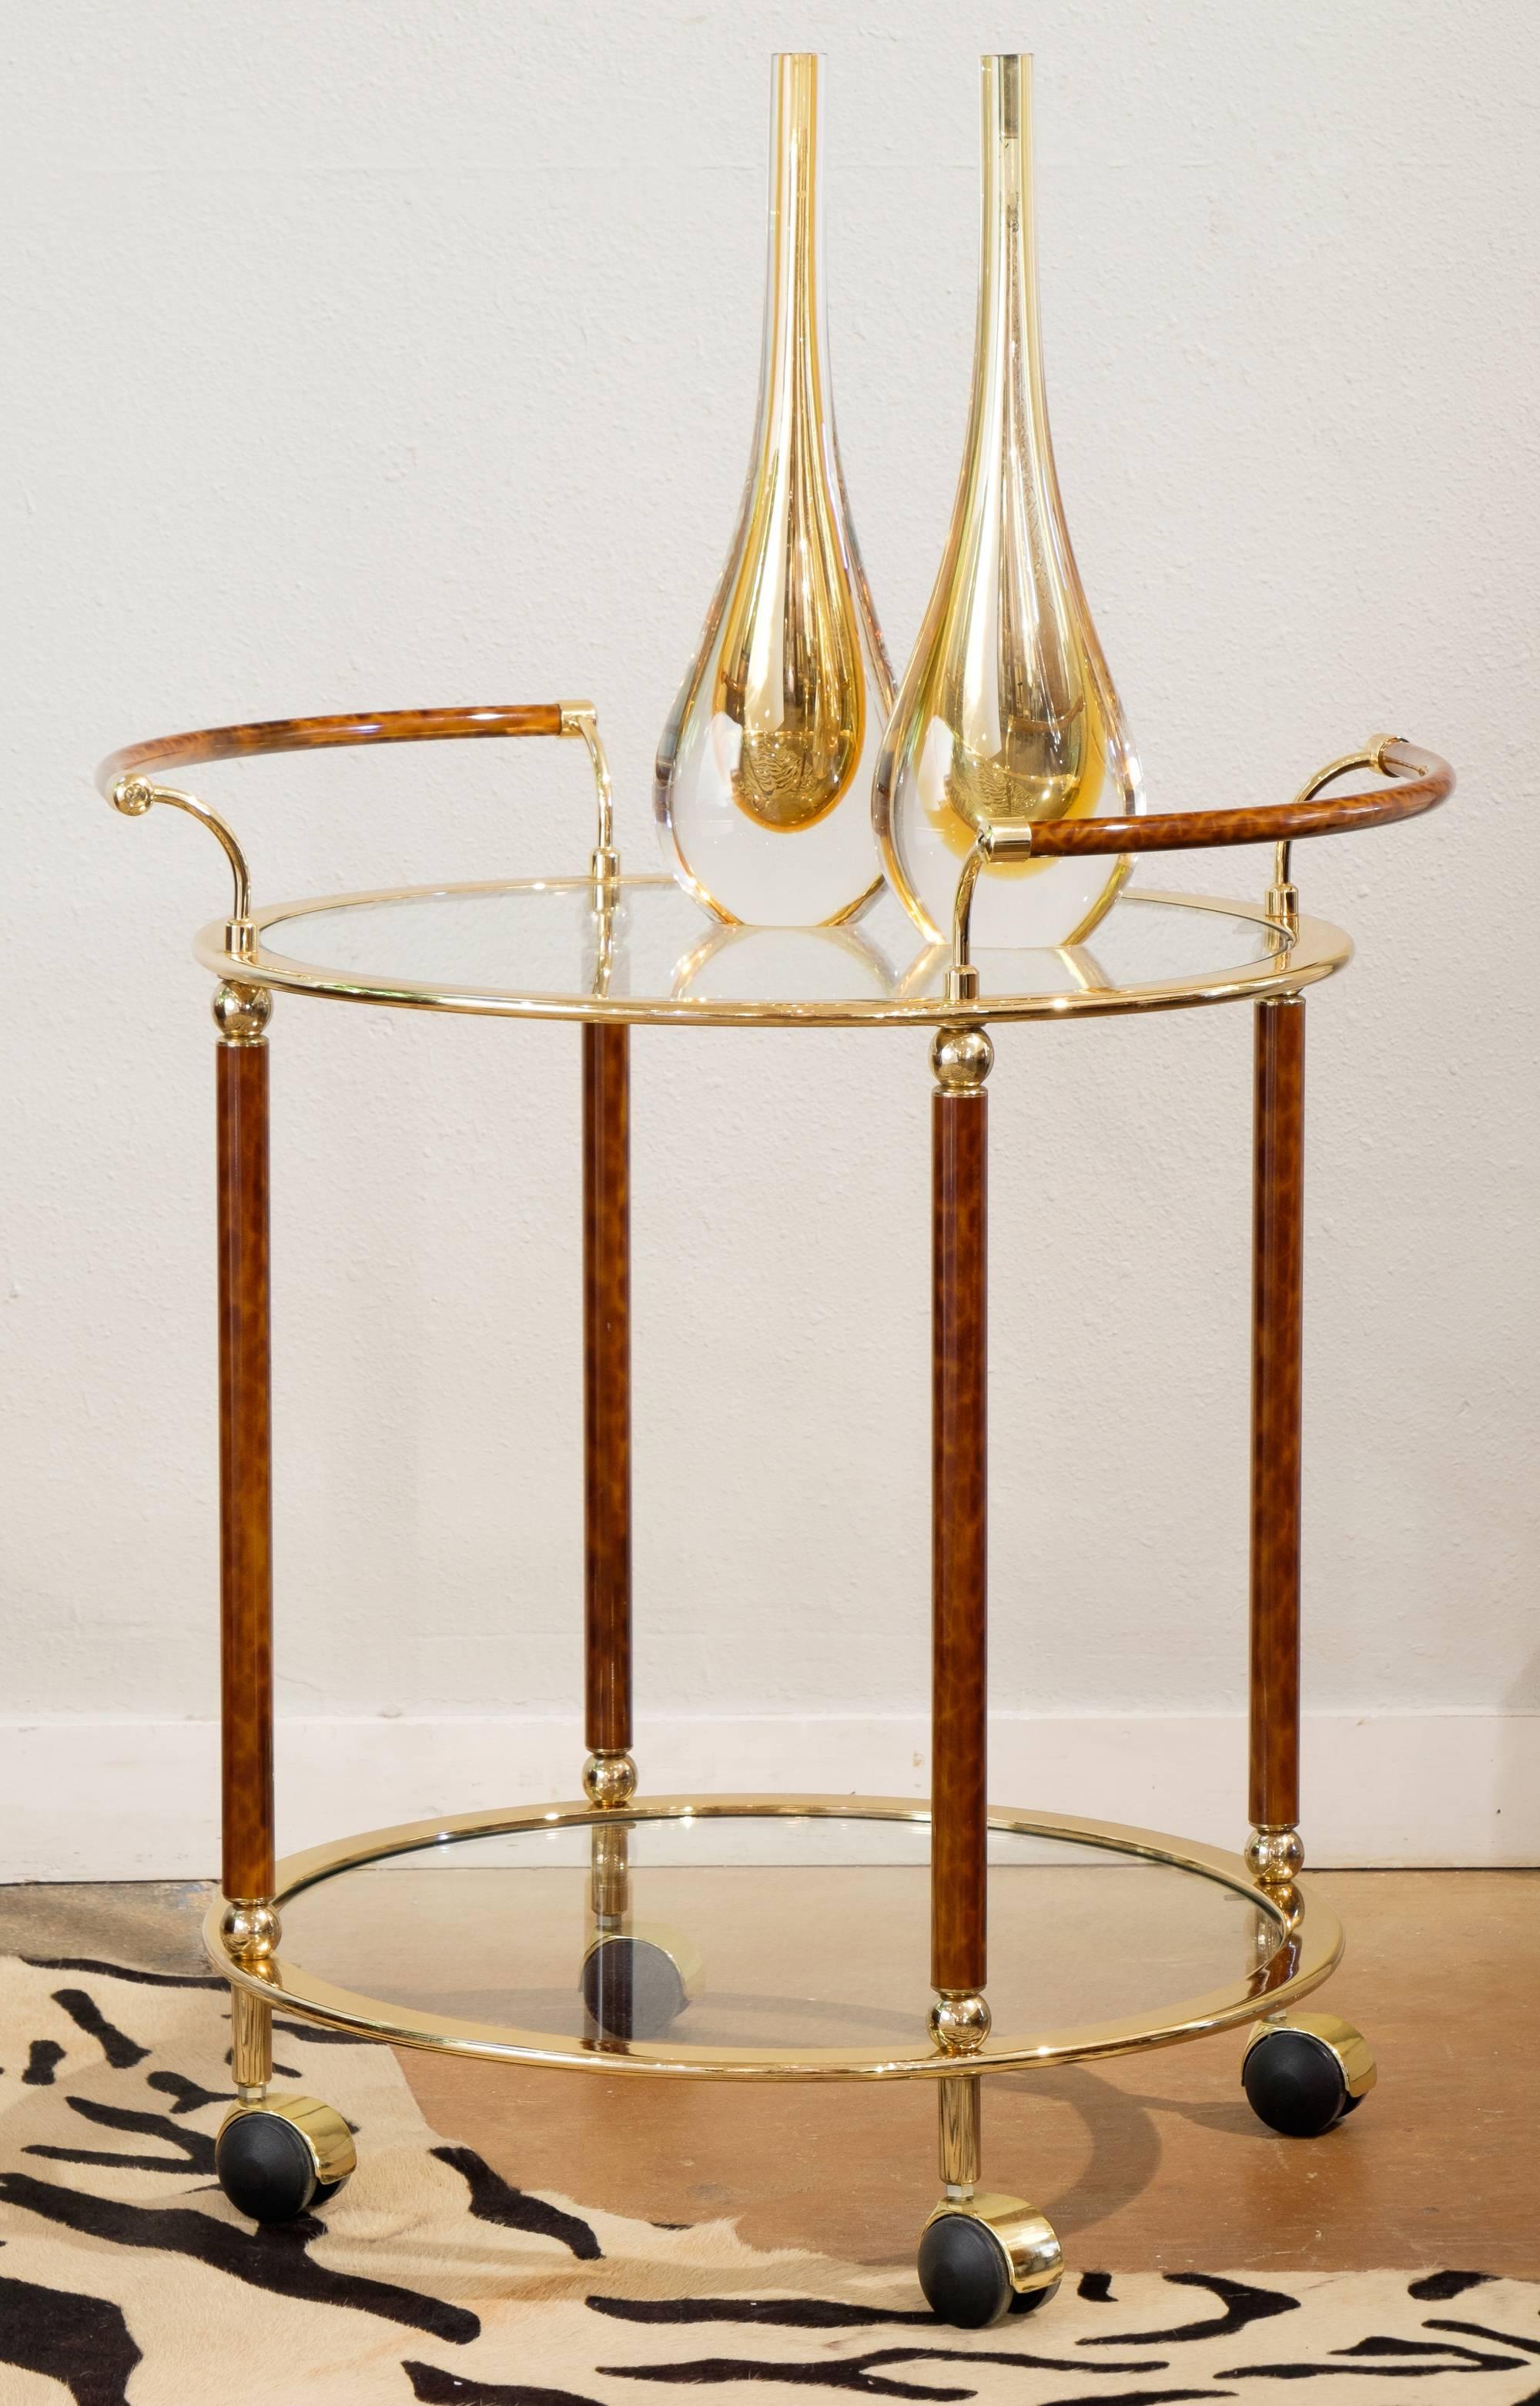 An elegant vintage French round brass glass top bar cart by Maison Lancel with faux tortoise shell on casters for ease of mobility. This rich and warm piece makes a handsome bar cart worthy of the world best Pimm's cup or ready to be a wonderful